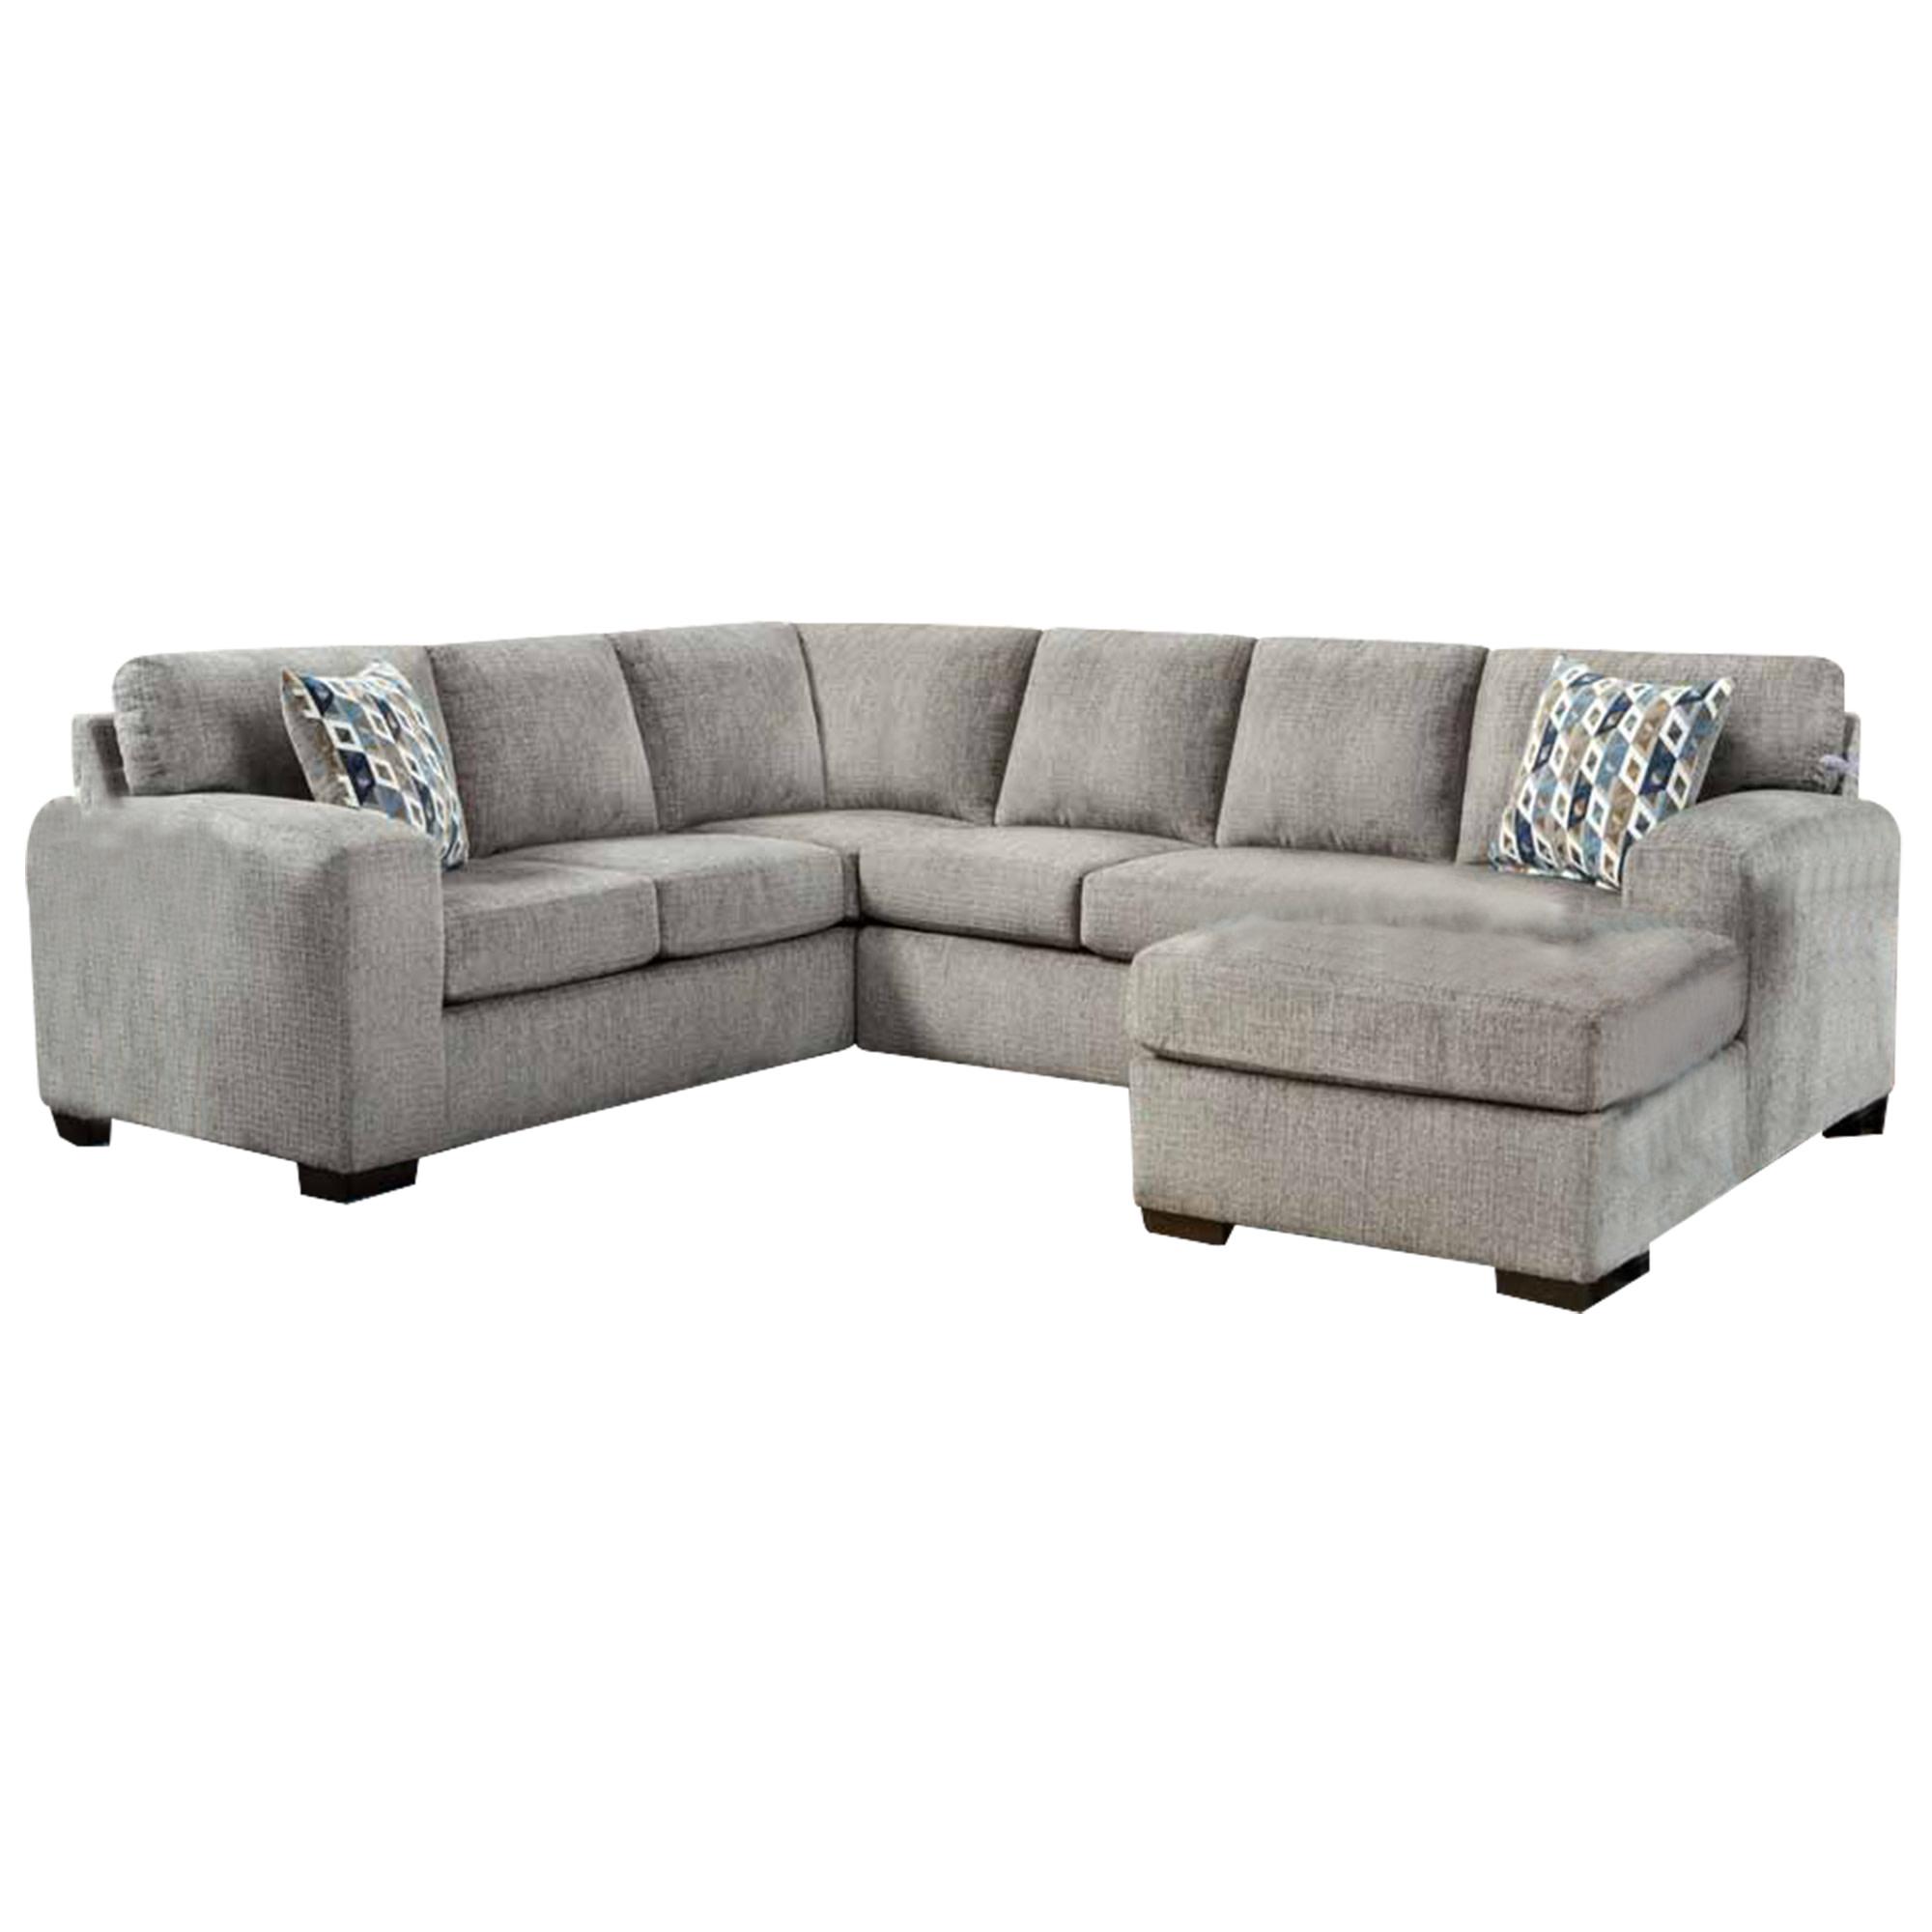 Silverton Grey 3-piece Sectional with Floating Ottoman